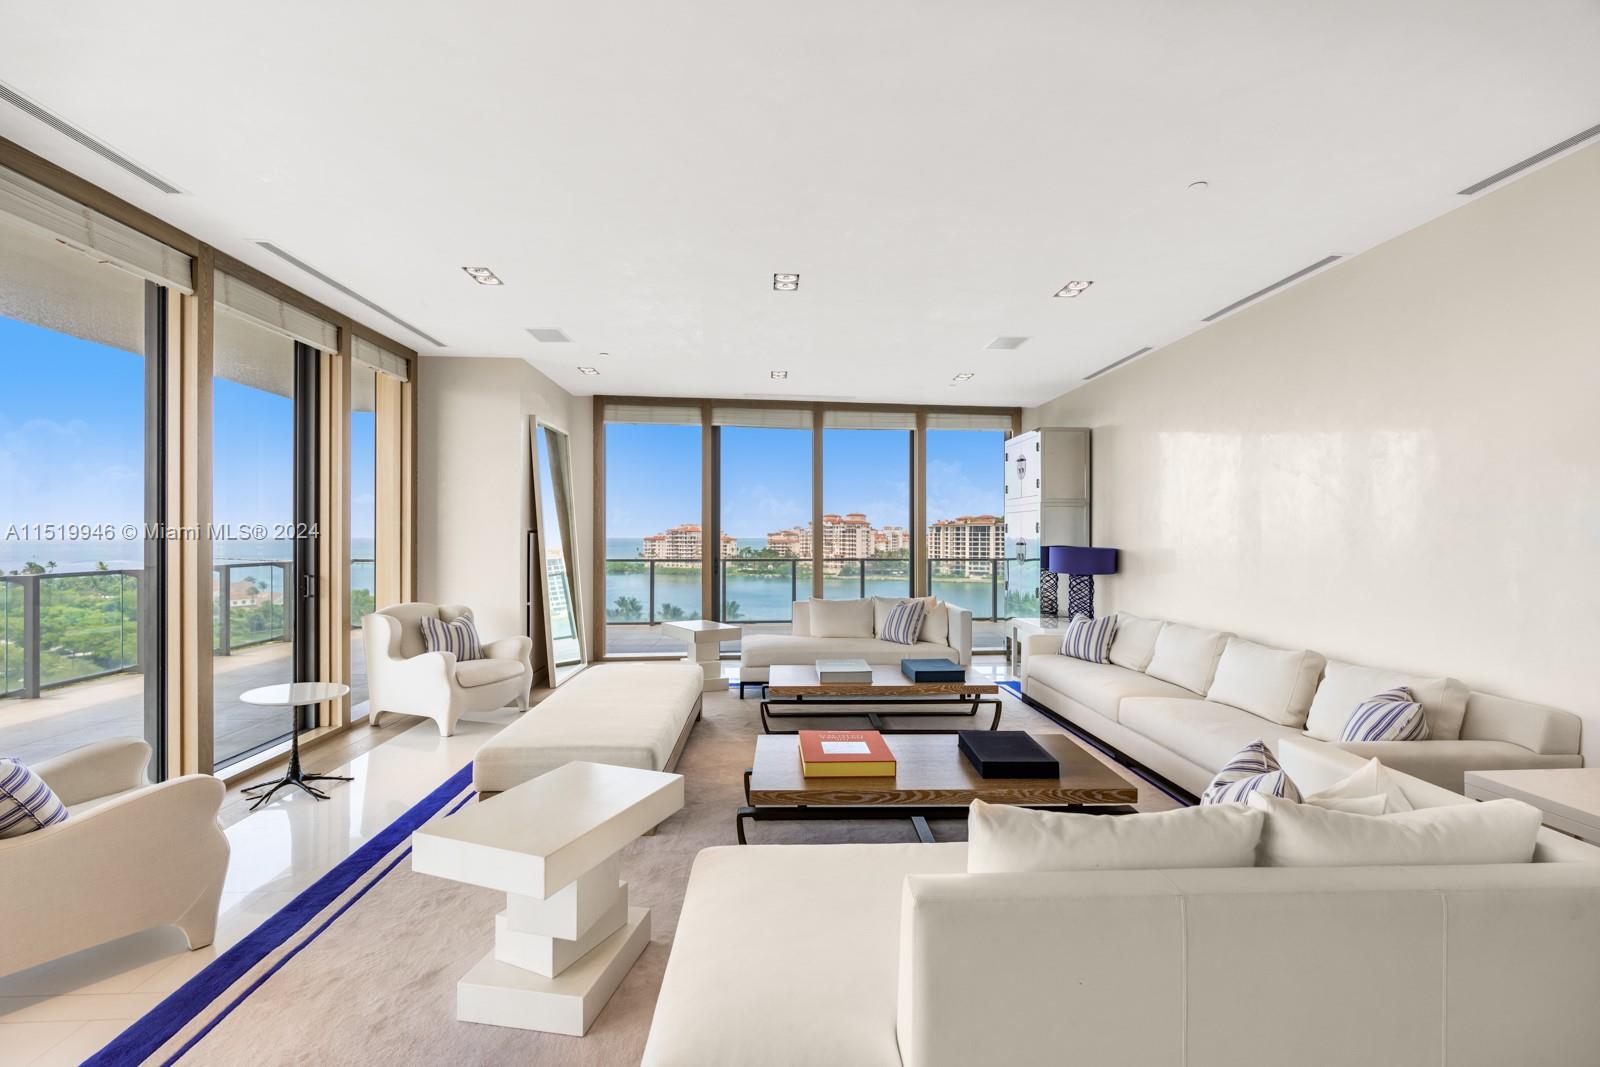 Designed by renowned Luis Bustamante, this turn-key residence at the exclusive Apogee features furniture & lighting fixtures by Christian Liaigre, Promemoria, and Van der Stratten and offers an elevated living experience with views of the Ocean, Fisher Island, and city skyline. Upon entering, you'll be greeted by an open & airy floor plan that includes 4 BD/3.5 BA and an enclosed Media Room. The gourmet kitchen features top-of-the-line appliances and access to a gas grill on the terrace. Apogee offers world-class amenities, including a fitness center, pool, & 24-hour concierge, ensuring your comfort & security at all times. Located in the highly sought-after South of Fifth neighborhood, this residence is just steps away from some of Miami's finest dining destinations.